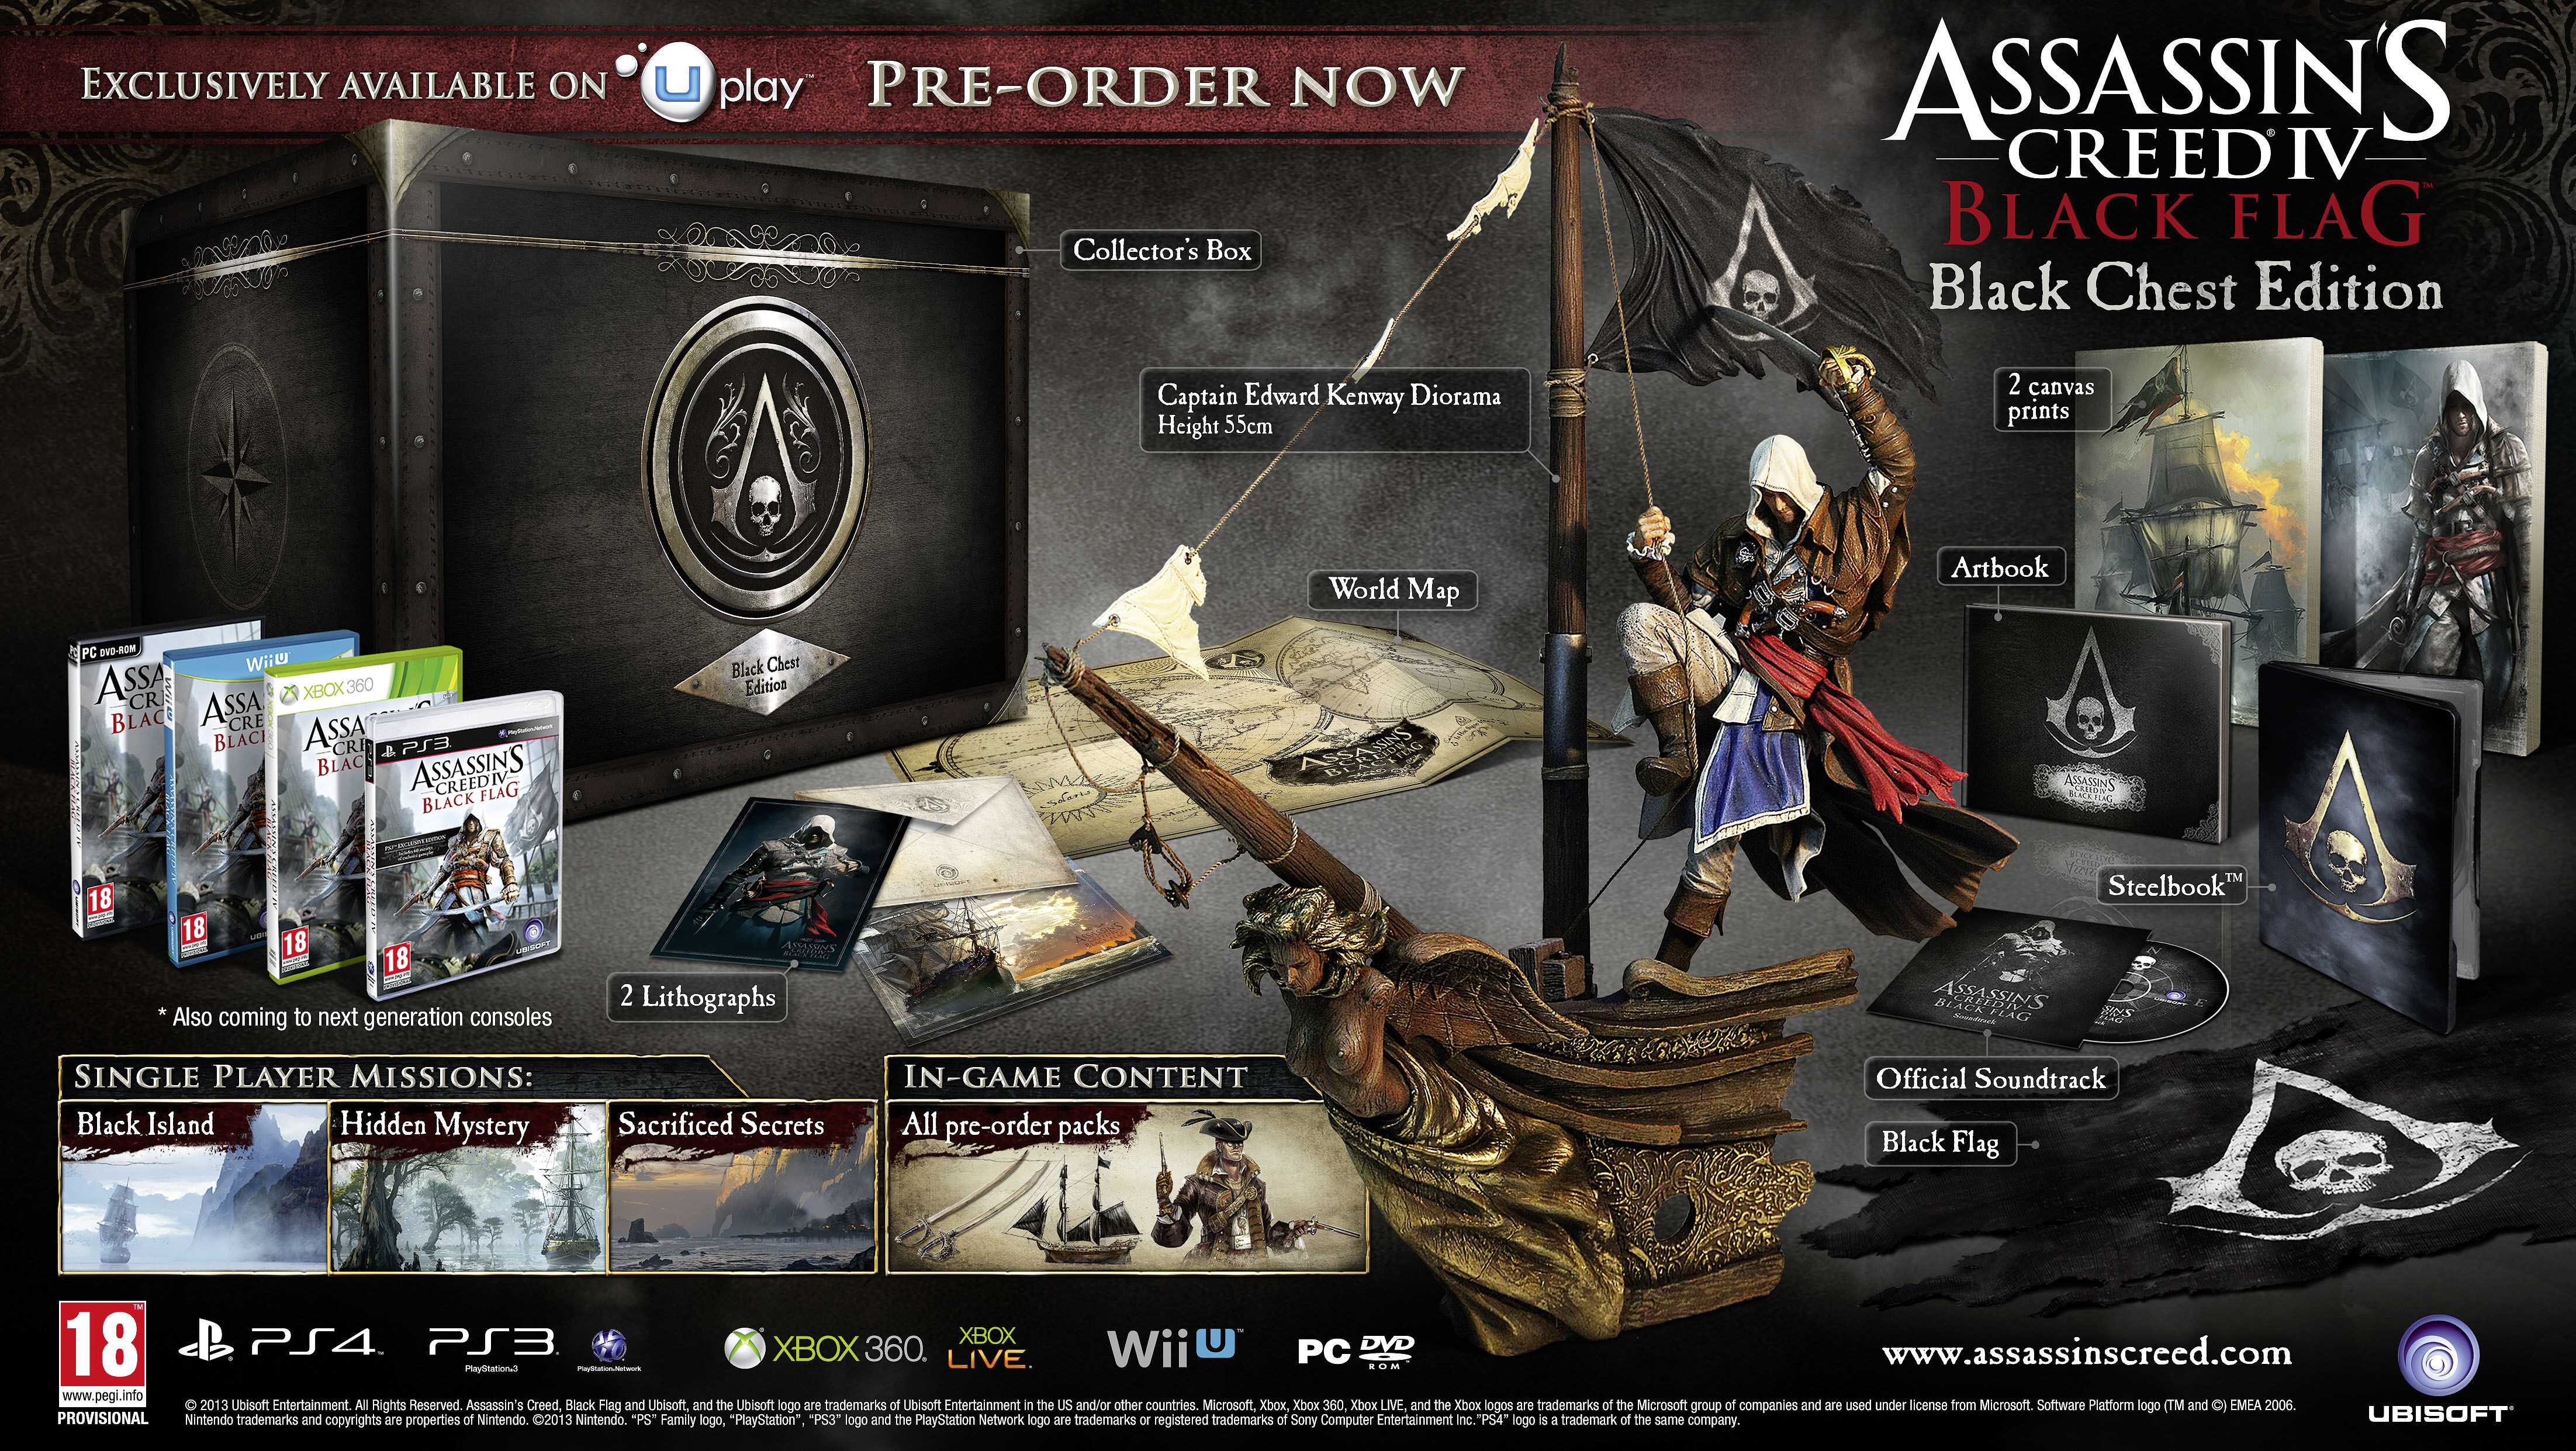 Assassin's Creed IV: Black Flag, Assassin's Creed Wiki